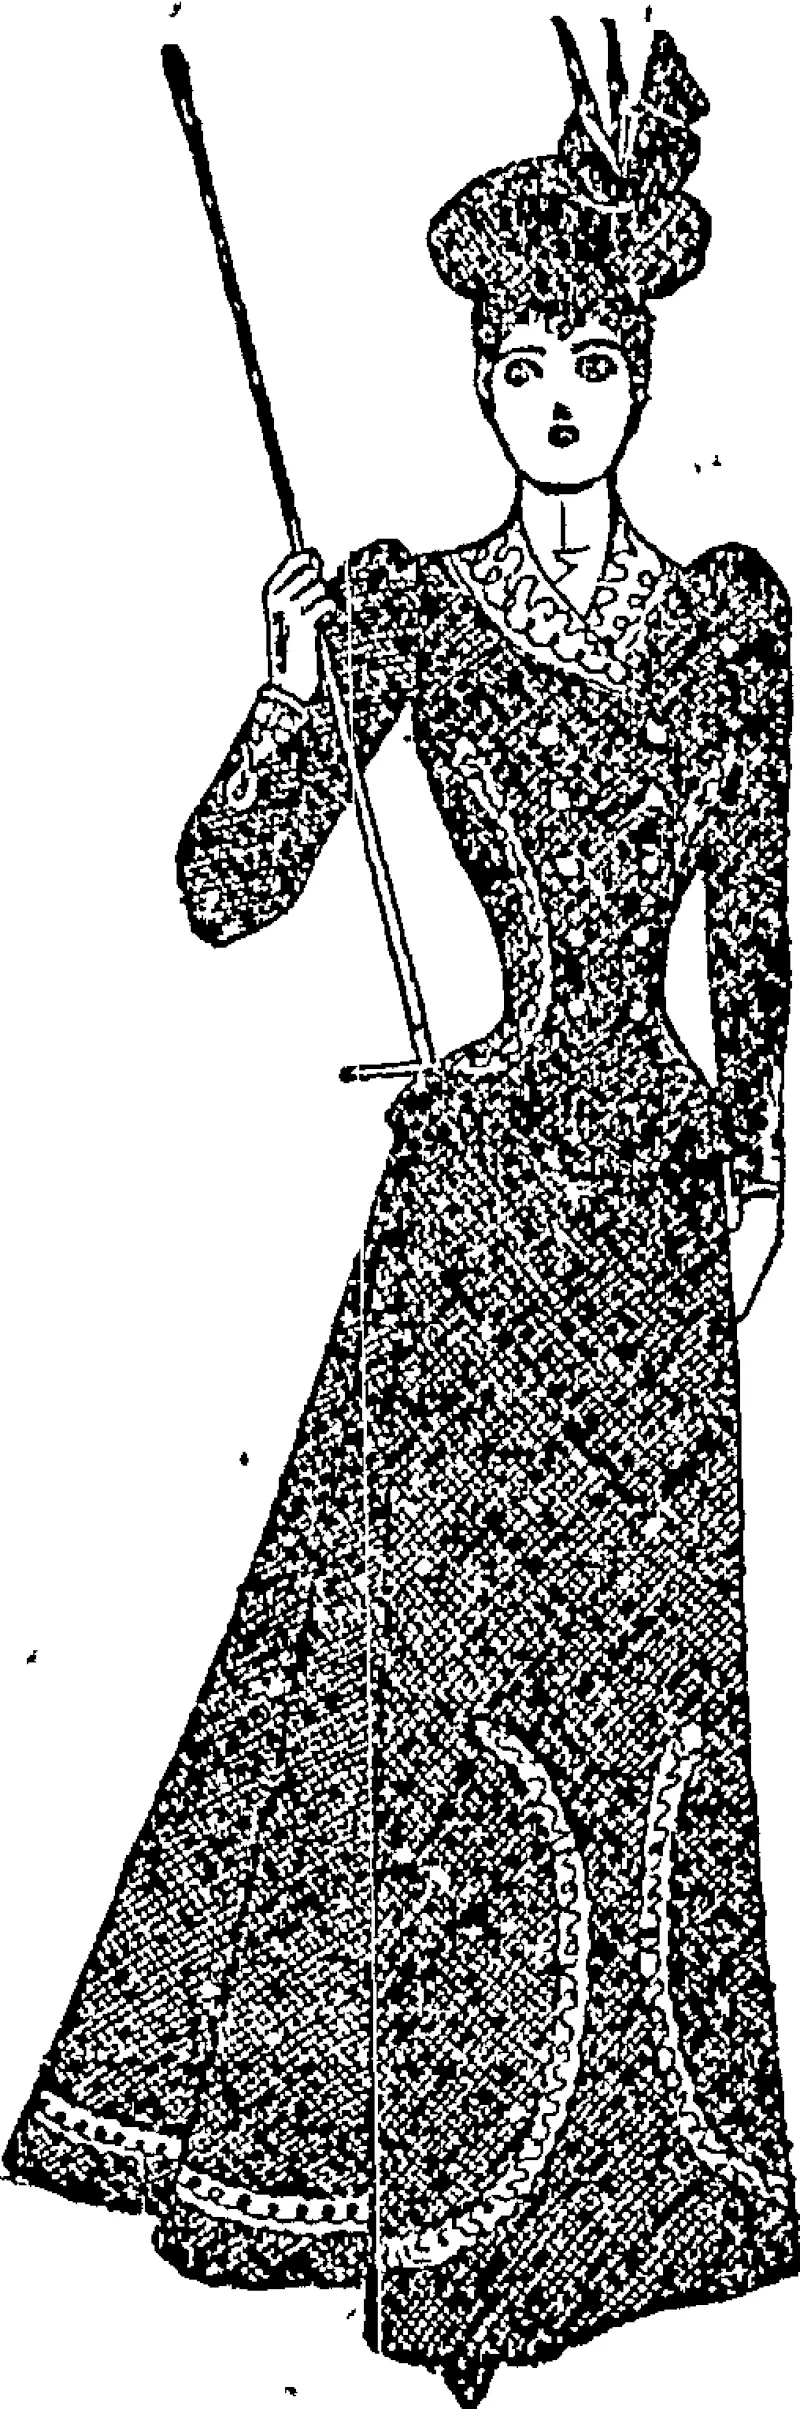 SMART TAILOR-MADE .COSTUME, (Auckland Star, 30 April 1898)